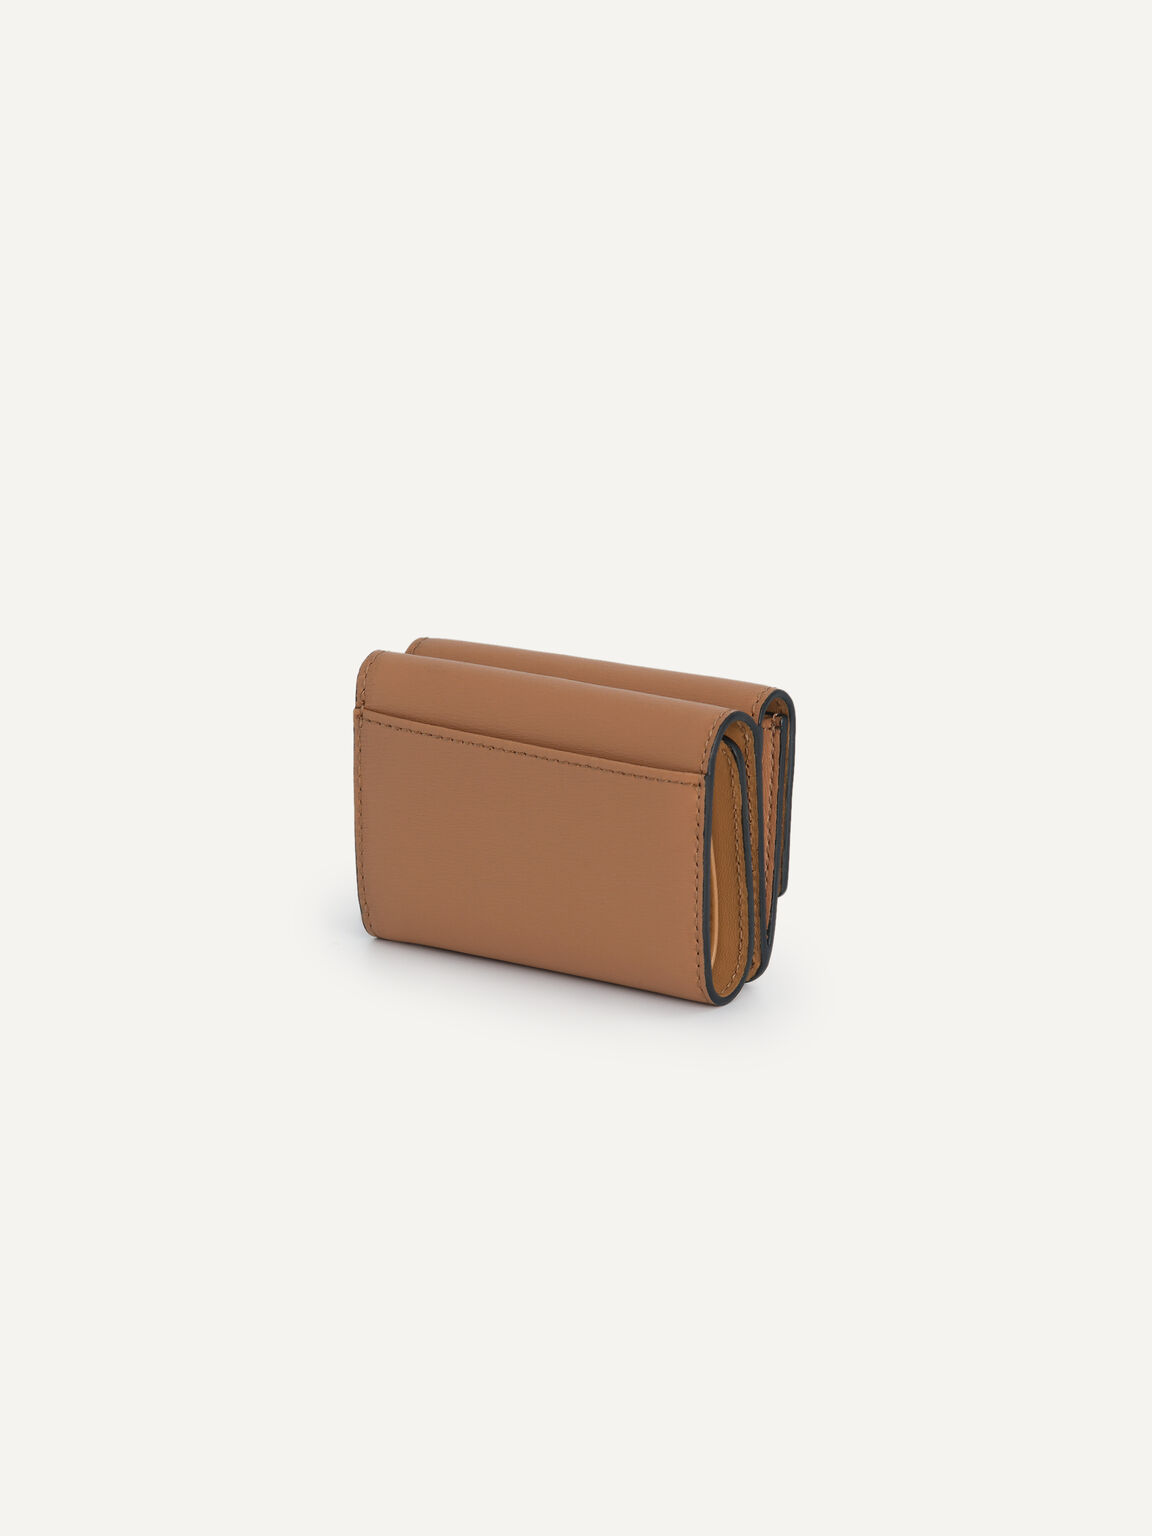 Textured Leather Trifold Wallet, Camel